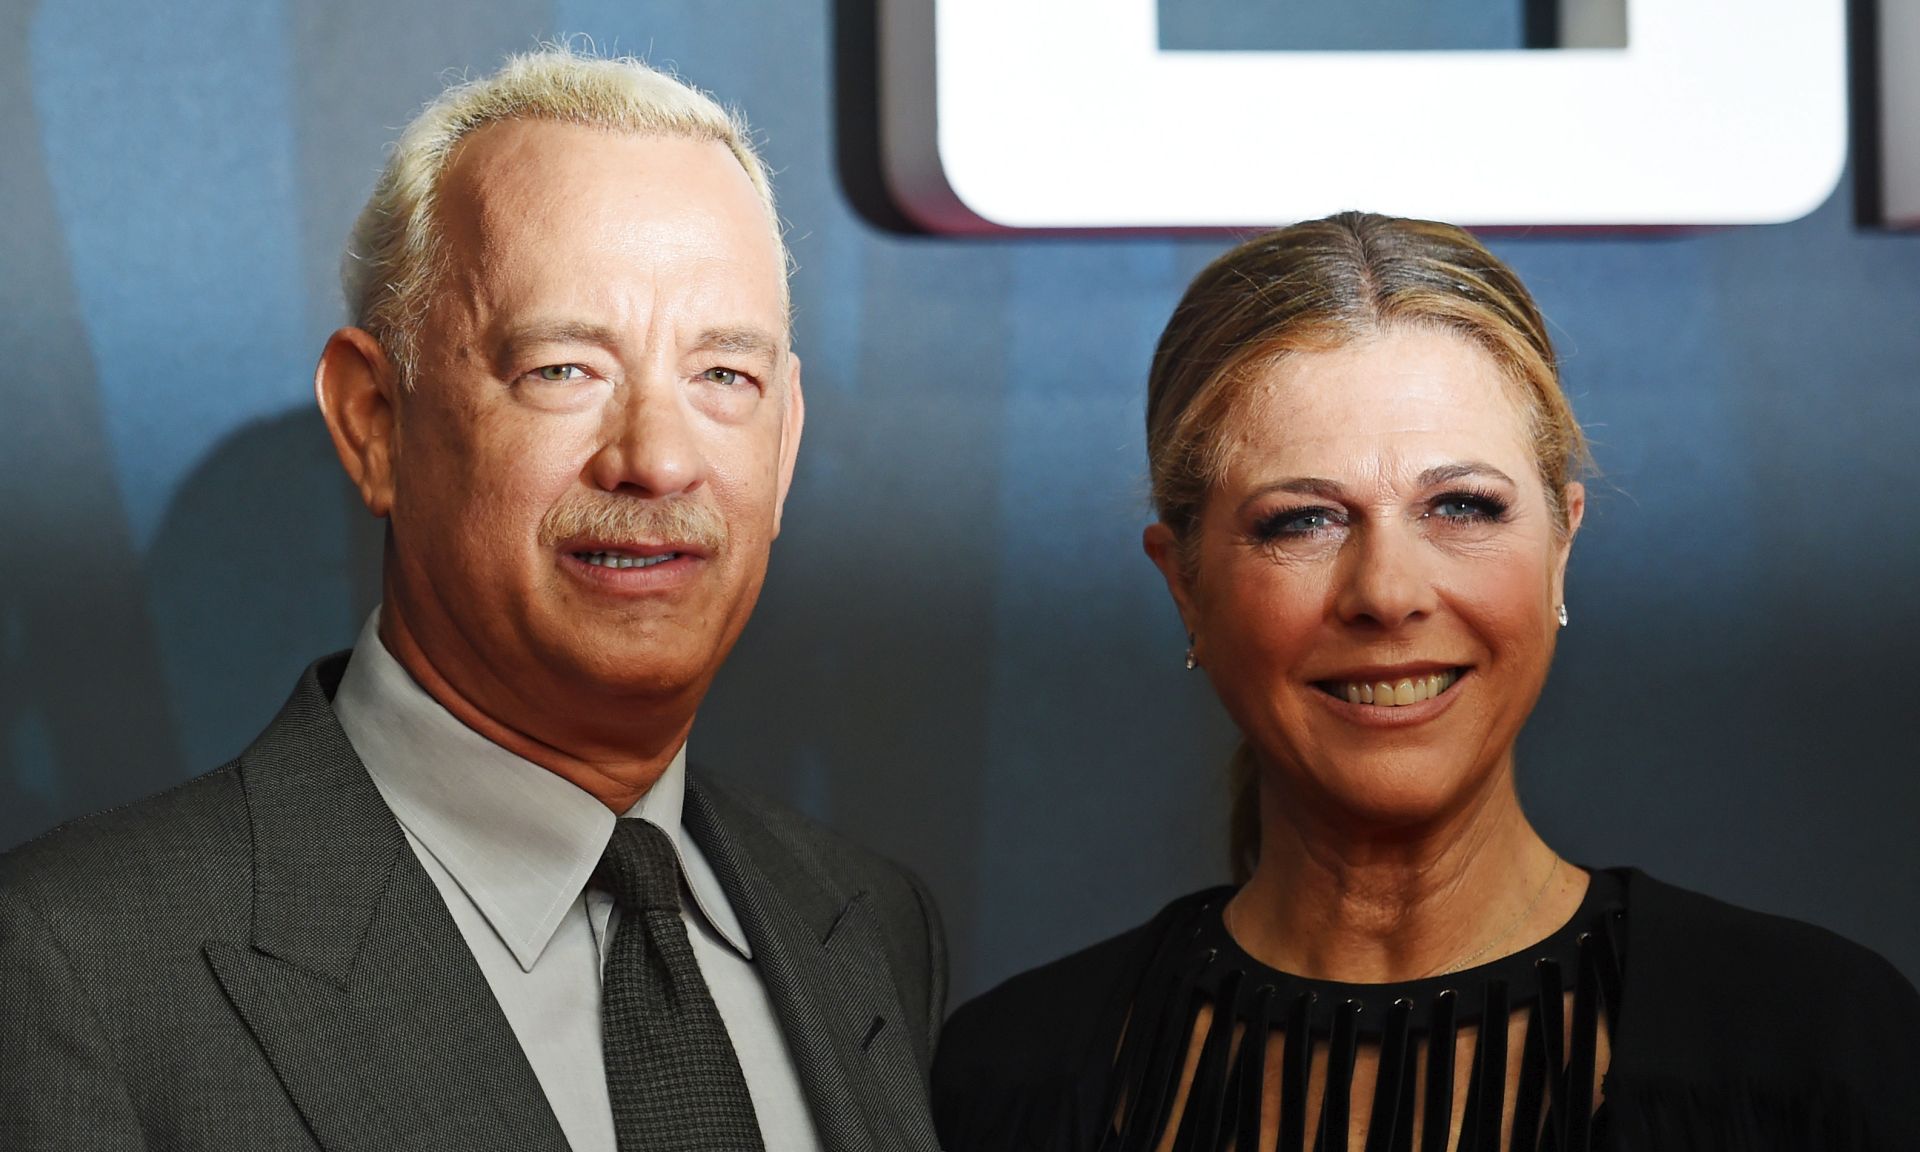 epa08287761 (FILE) - US actor/cast member Tom Hanks (L) and his wife Rita Wilson arrive for the premiere of 'Bridge Of Spies' in Berlin, Germany, 13 November 2015 (reissued 12 March 2020). According to media reports, Tom Hanks and his wife Rita Wilson tested positive for coronavirus.  EPA/BRITTA PEDERSEN  GERMANY OUT